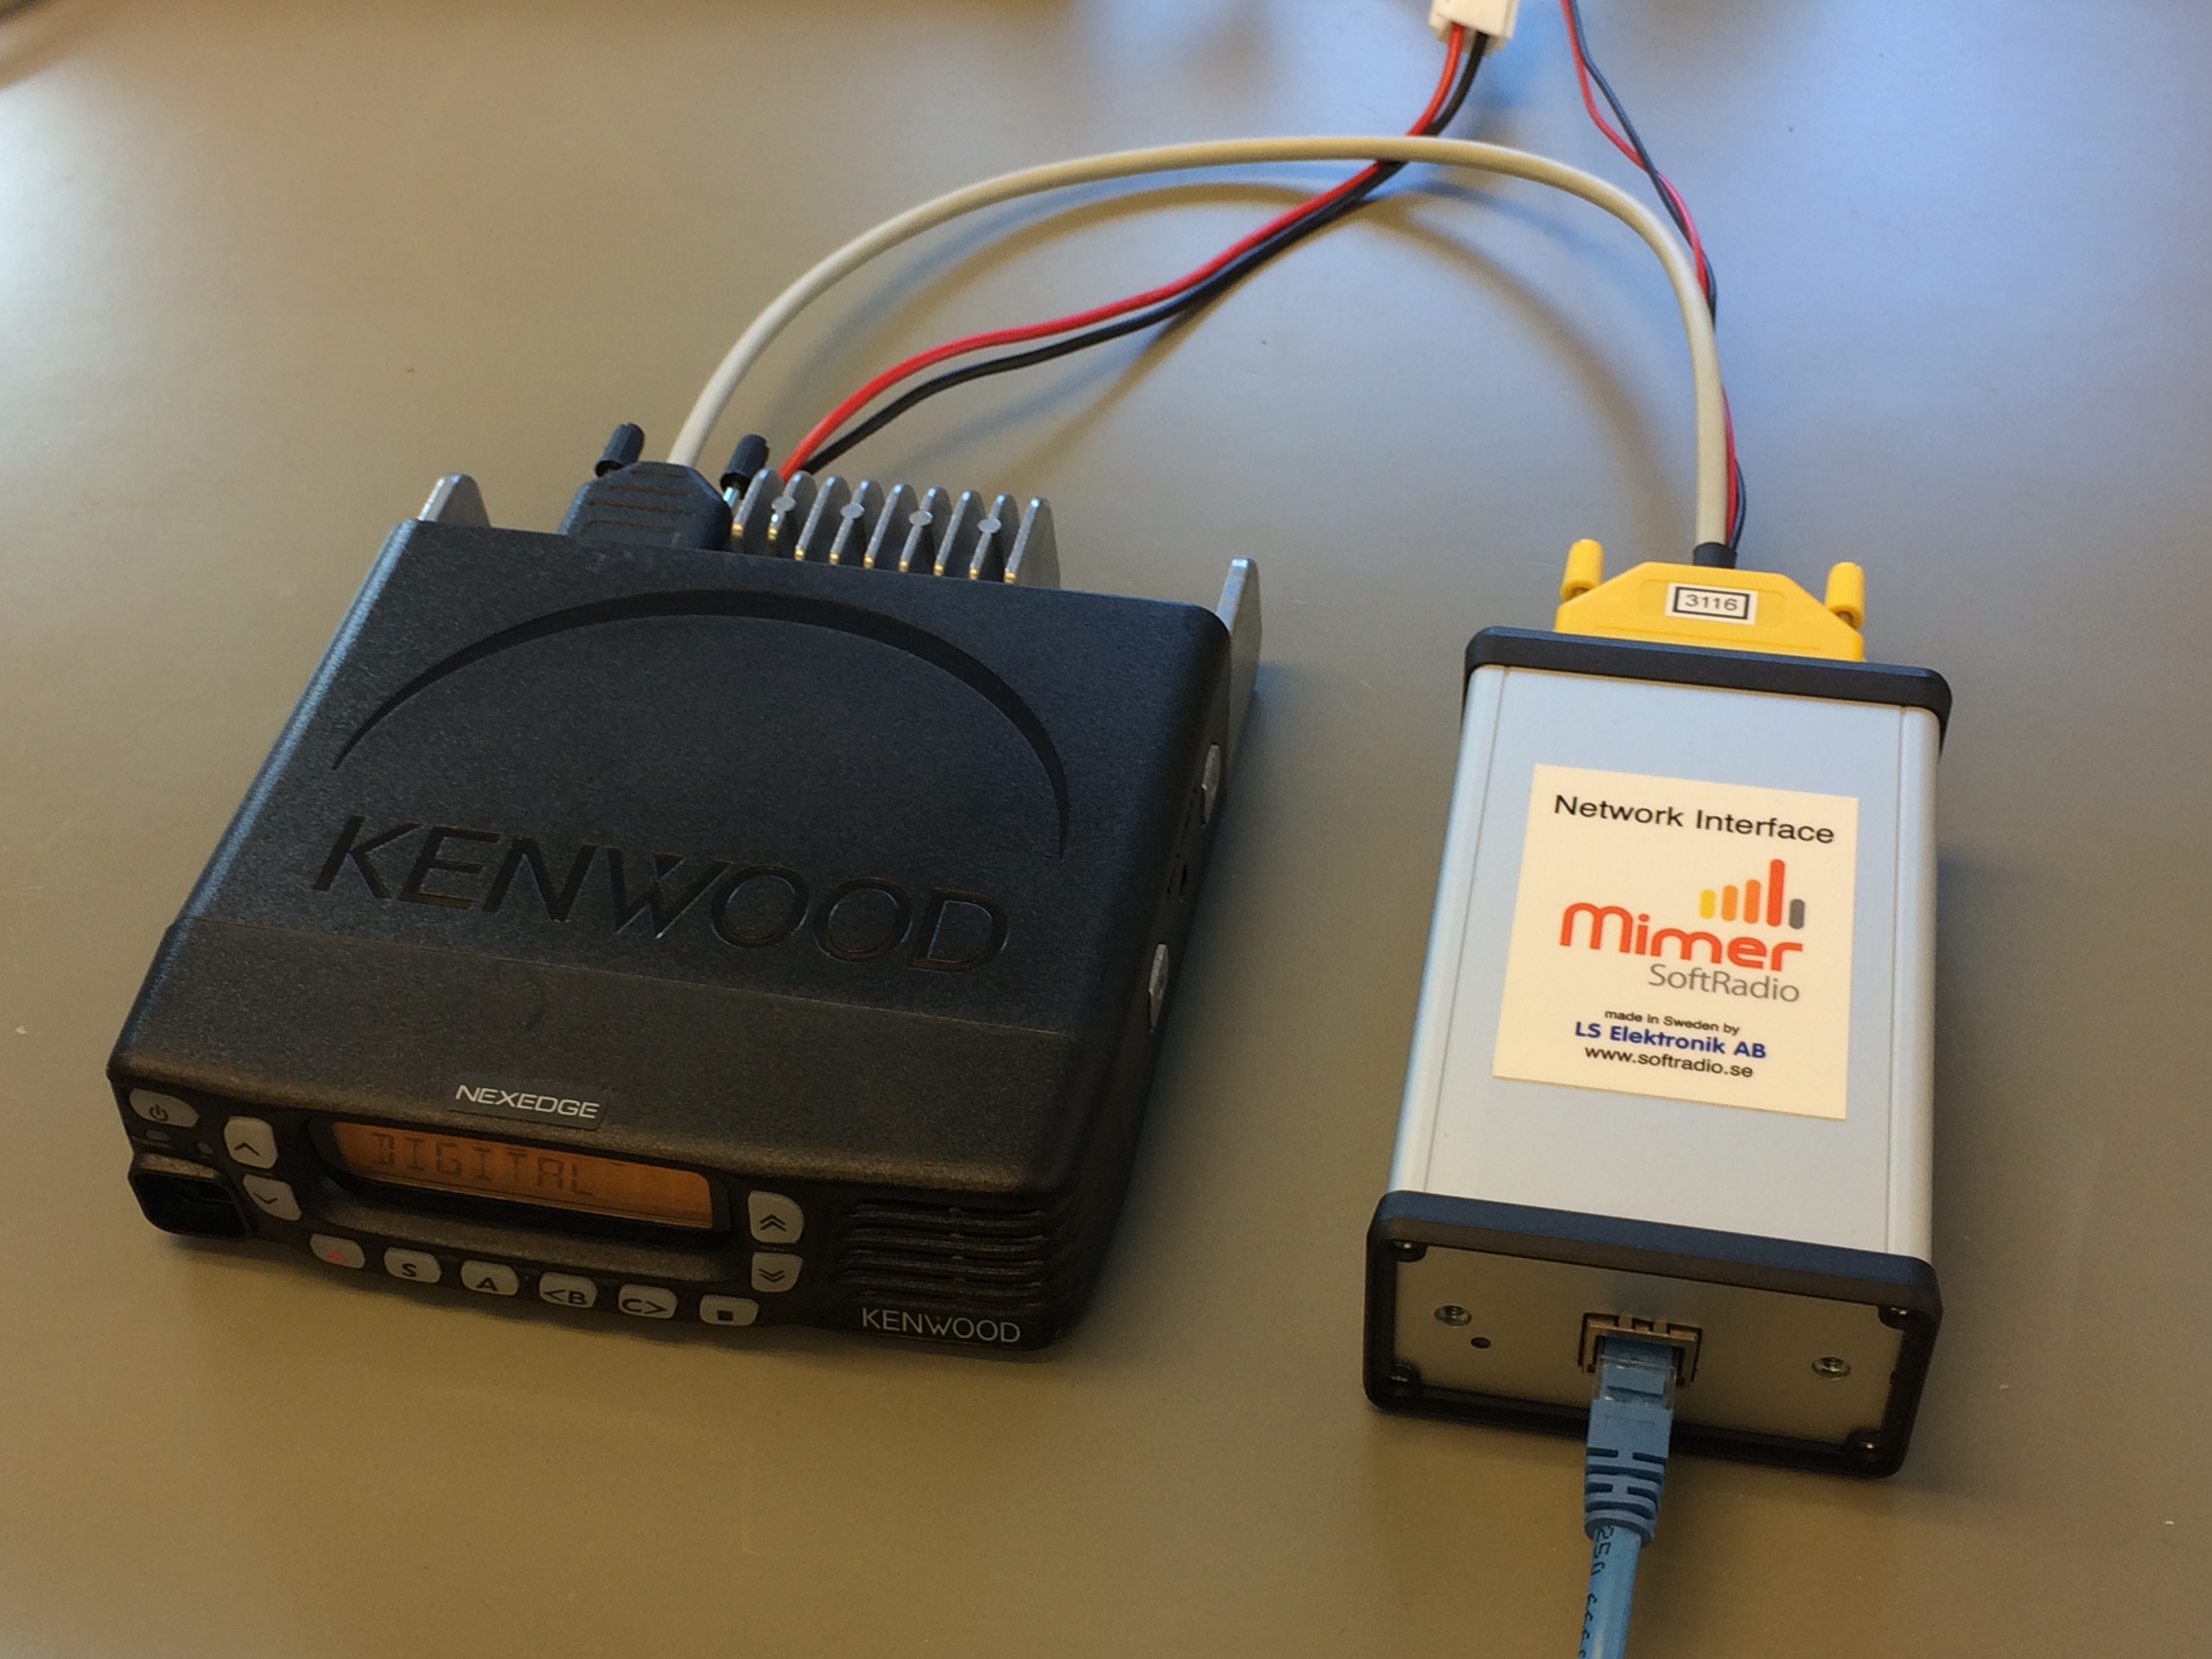 Kenwood NX720 radio with Network Interface and Cable Kit